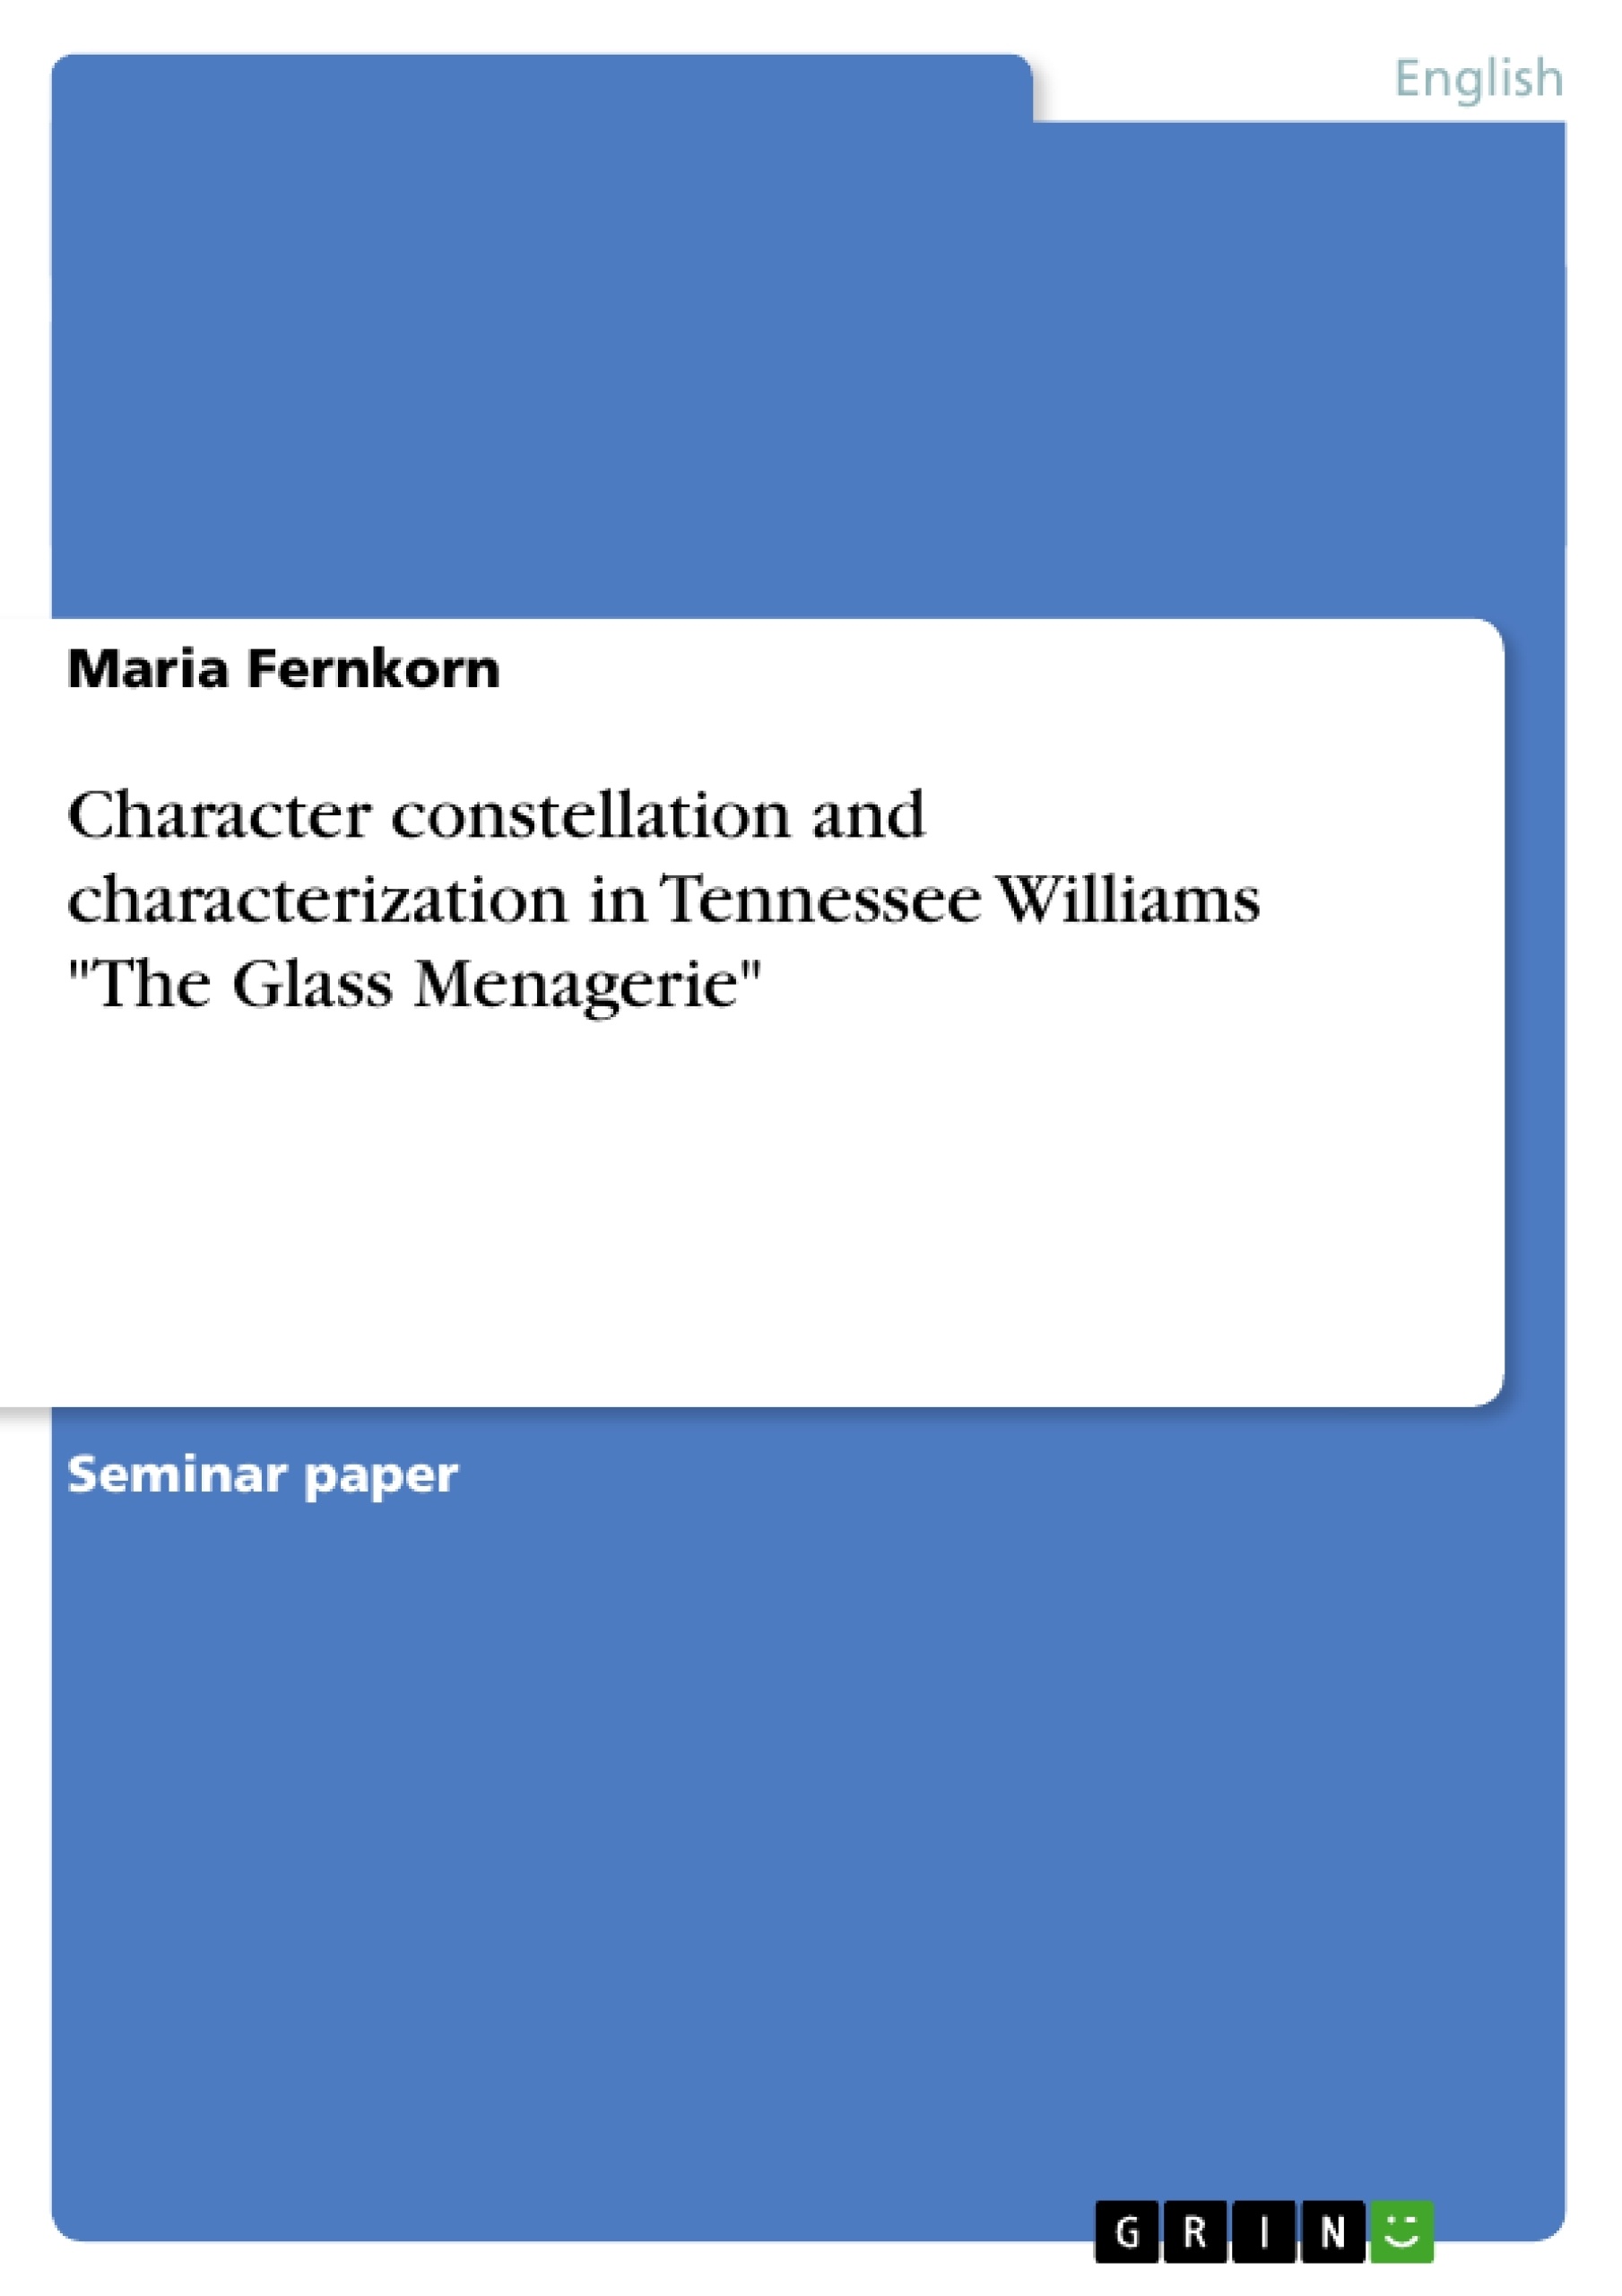 Title: Character constellation and characterization in Tennessee Williams "The Glass Menagerie"